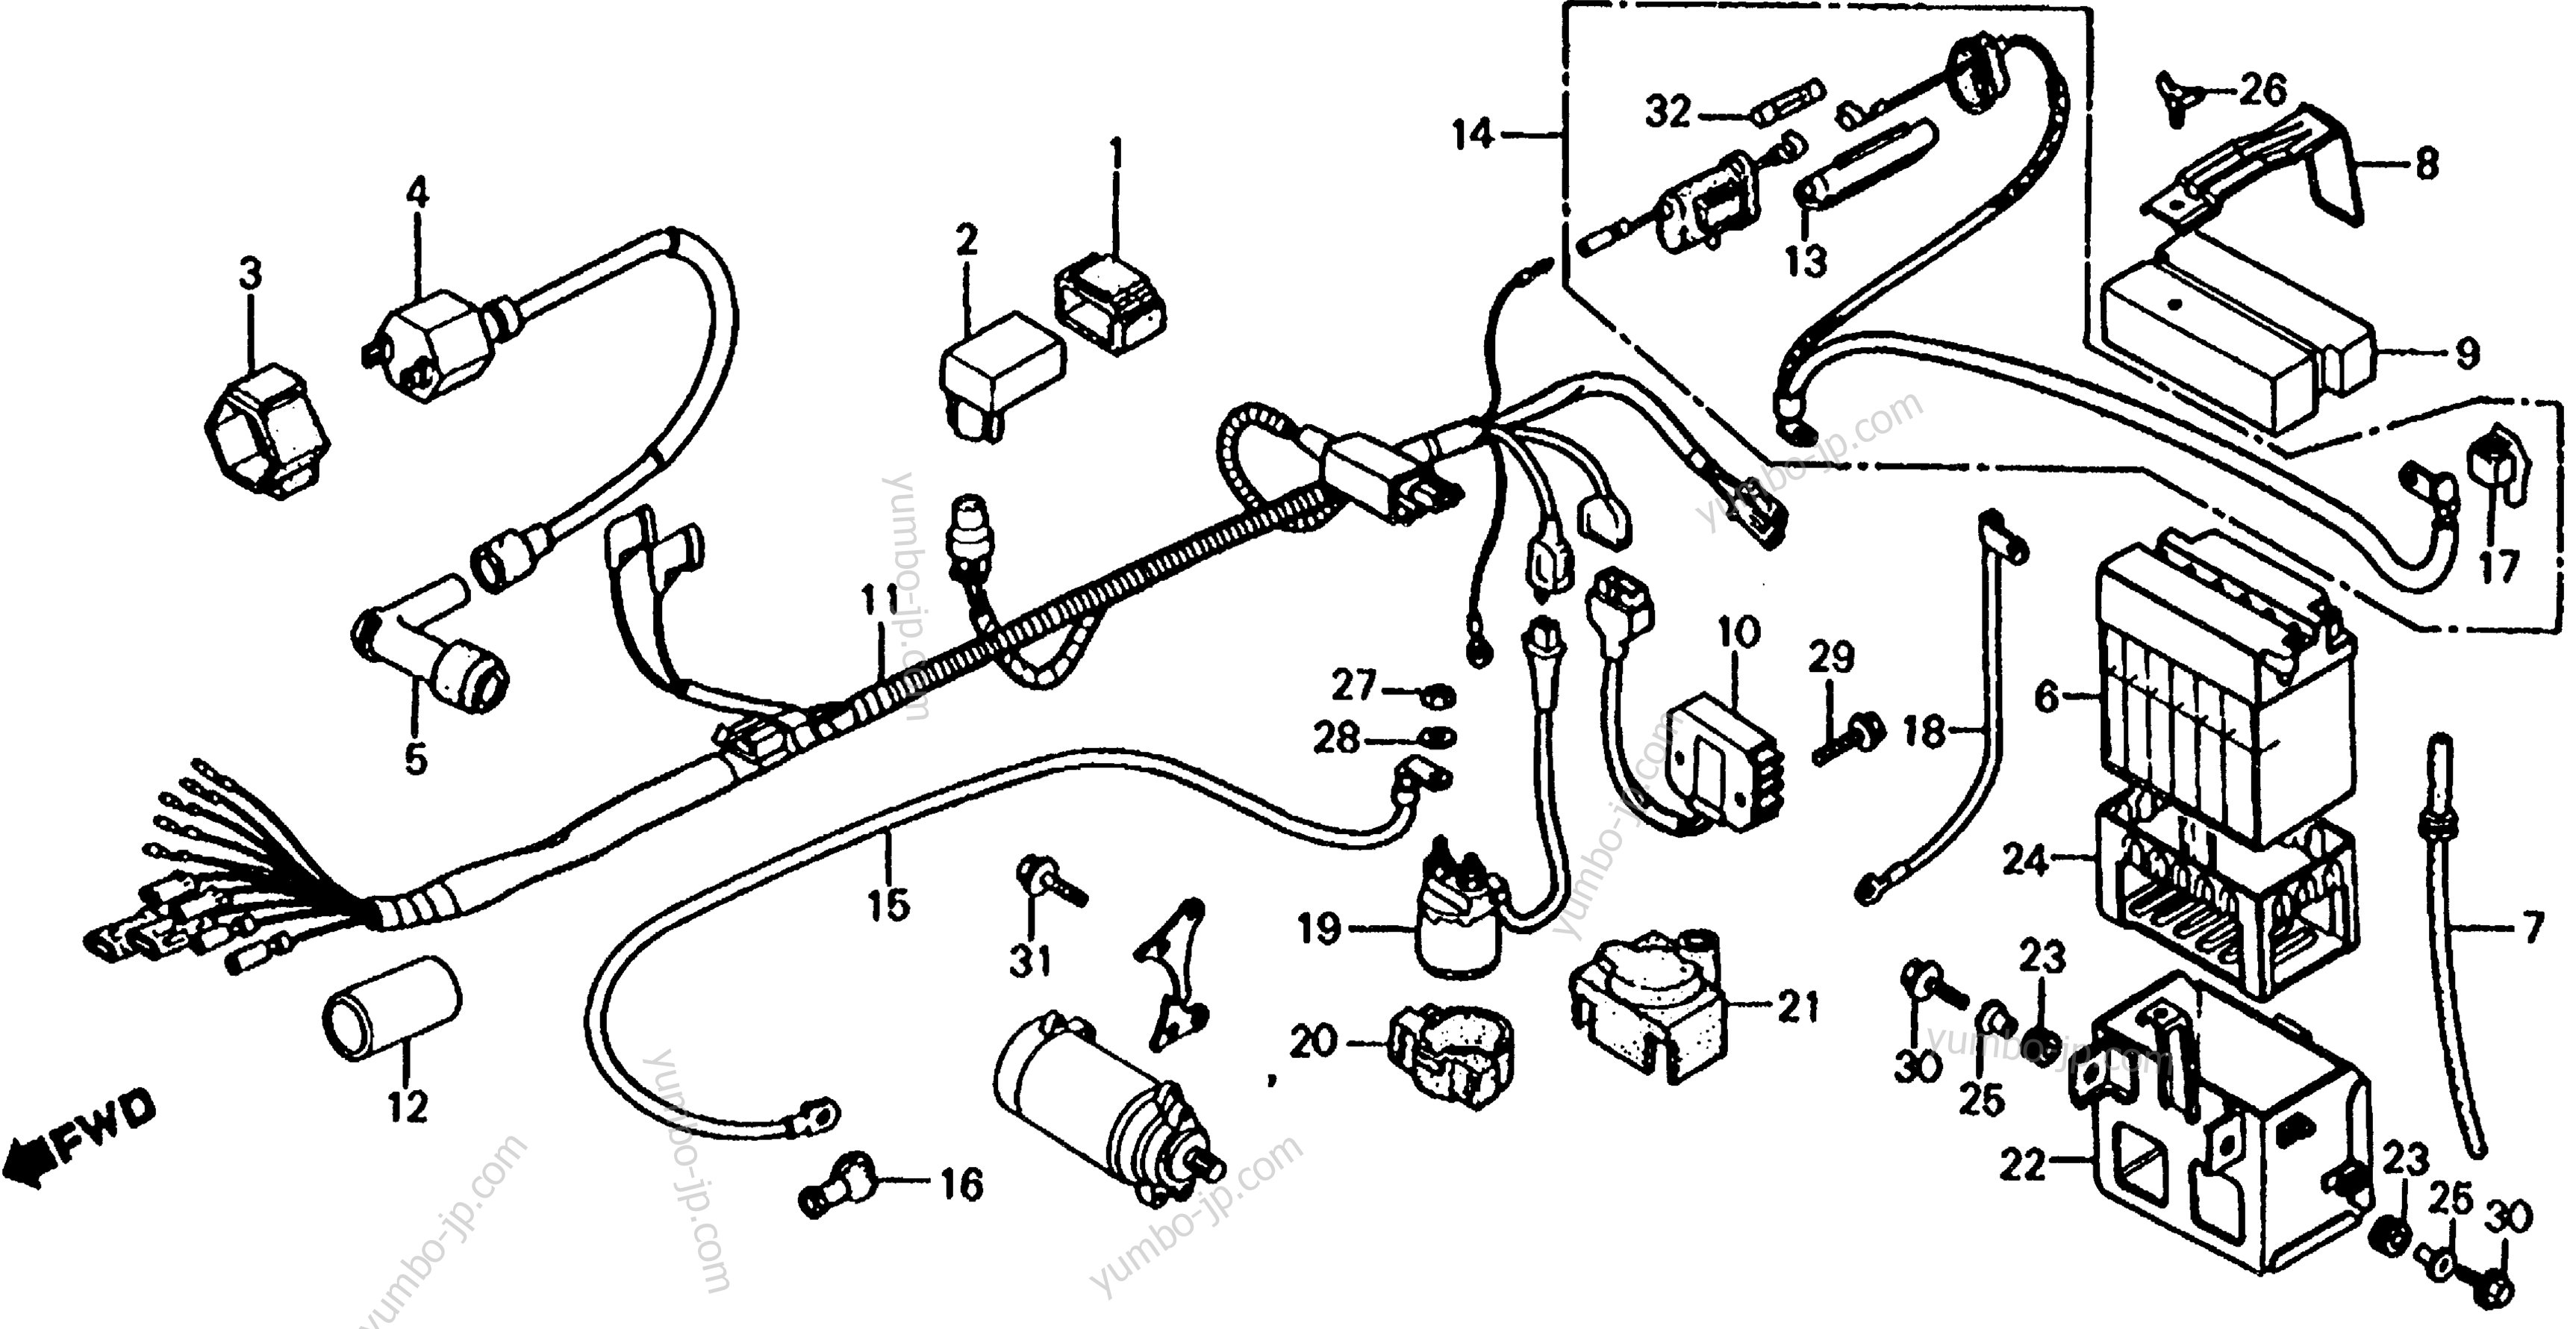 WIRE HARNESS for ATVs HONDA TRX125 A 1986 year